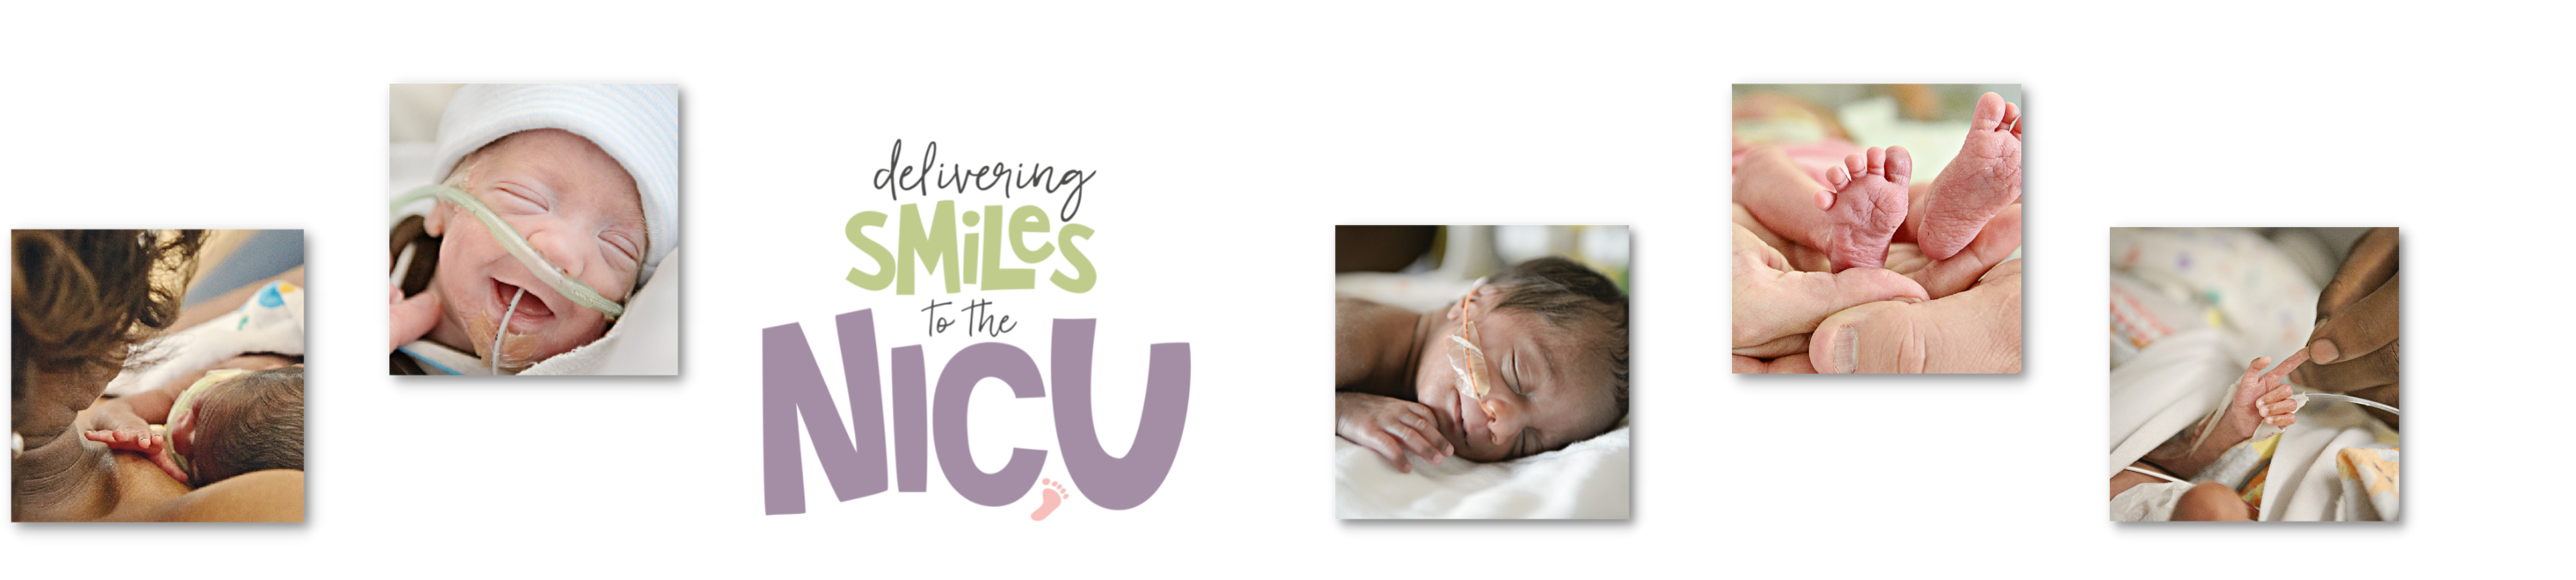 Text delivering smiles to the NICU with 5 images of NICU babies, NICU moms, preemie smiling, preemie with oxygen